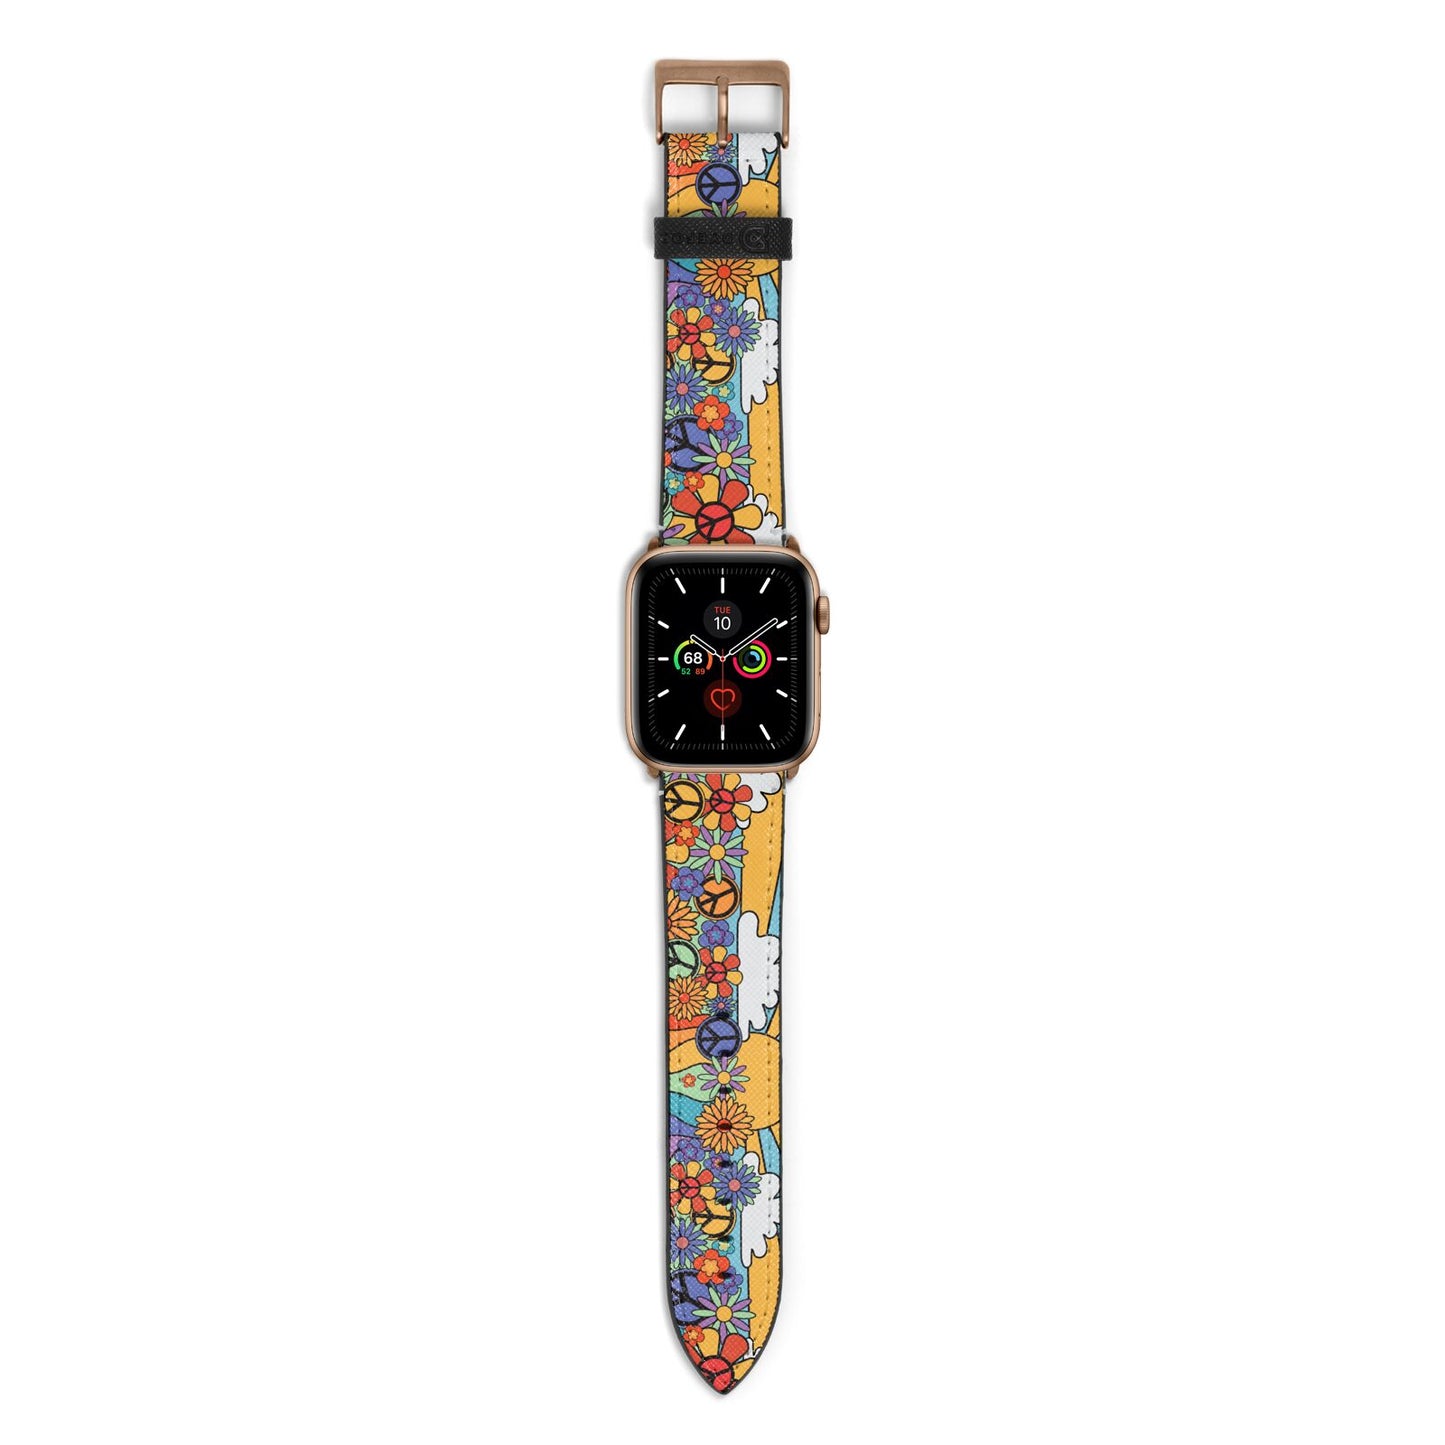 Seventies Groovy Retro Apple Watch Strap with Gold Hardware